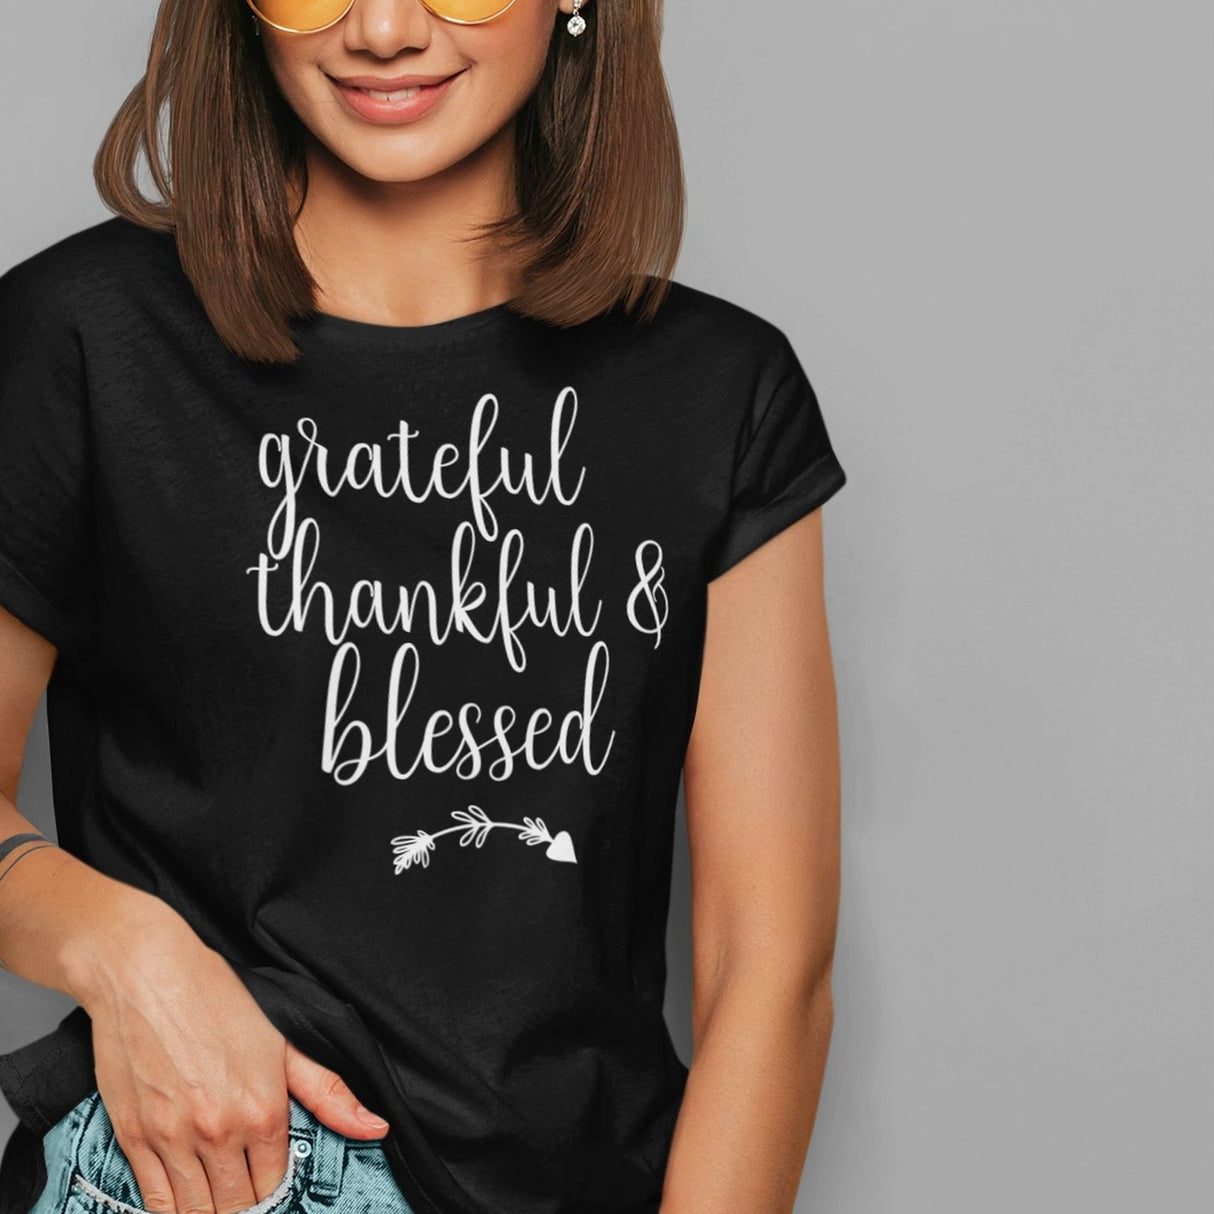 grateful-thankful-and-blessed-christian-tee-inspirational-t-shirt-jesus-tee-religion-t-shirt-faith-tee#color_black